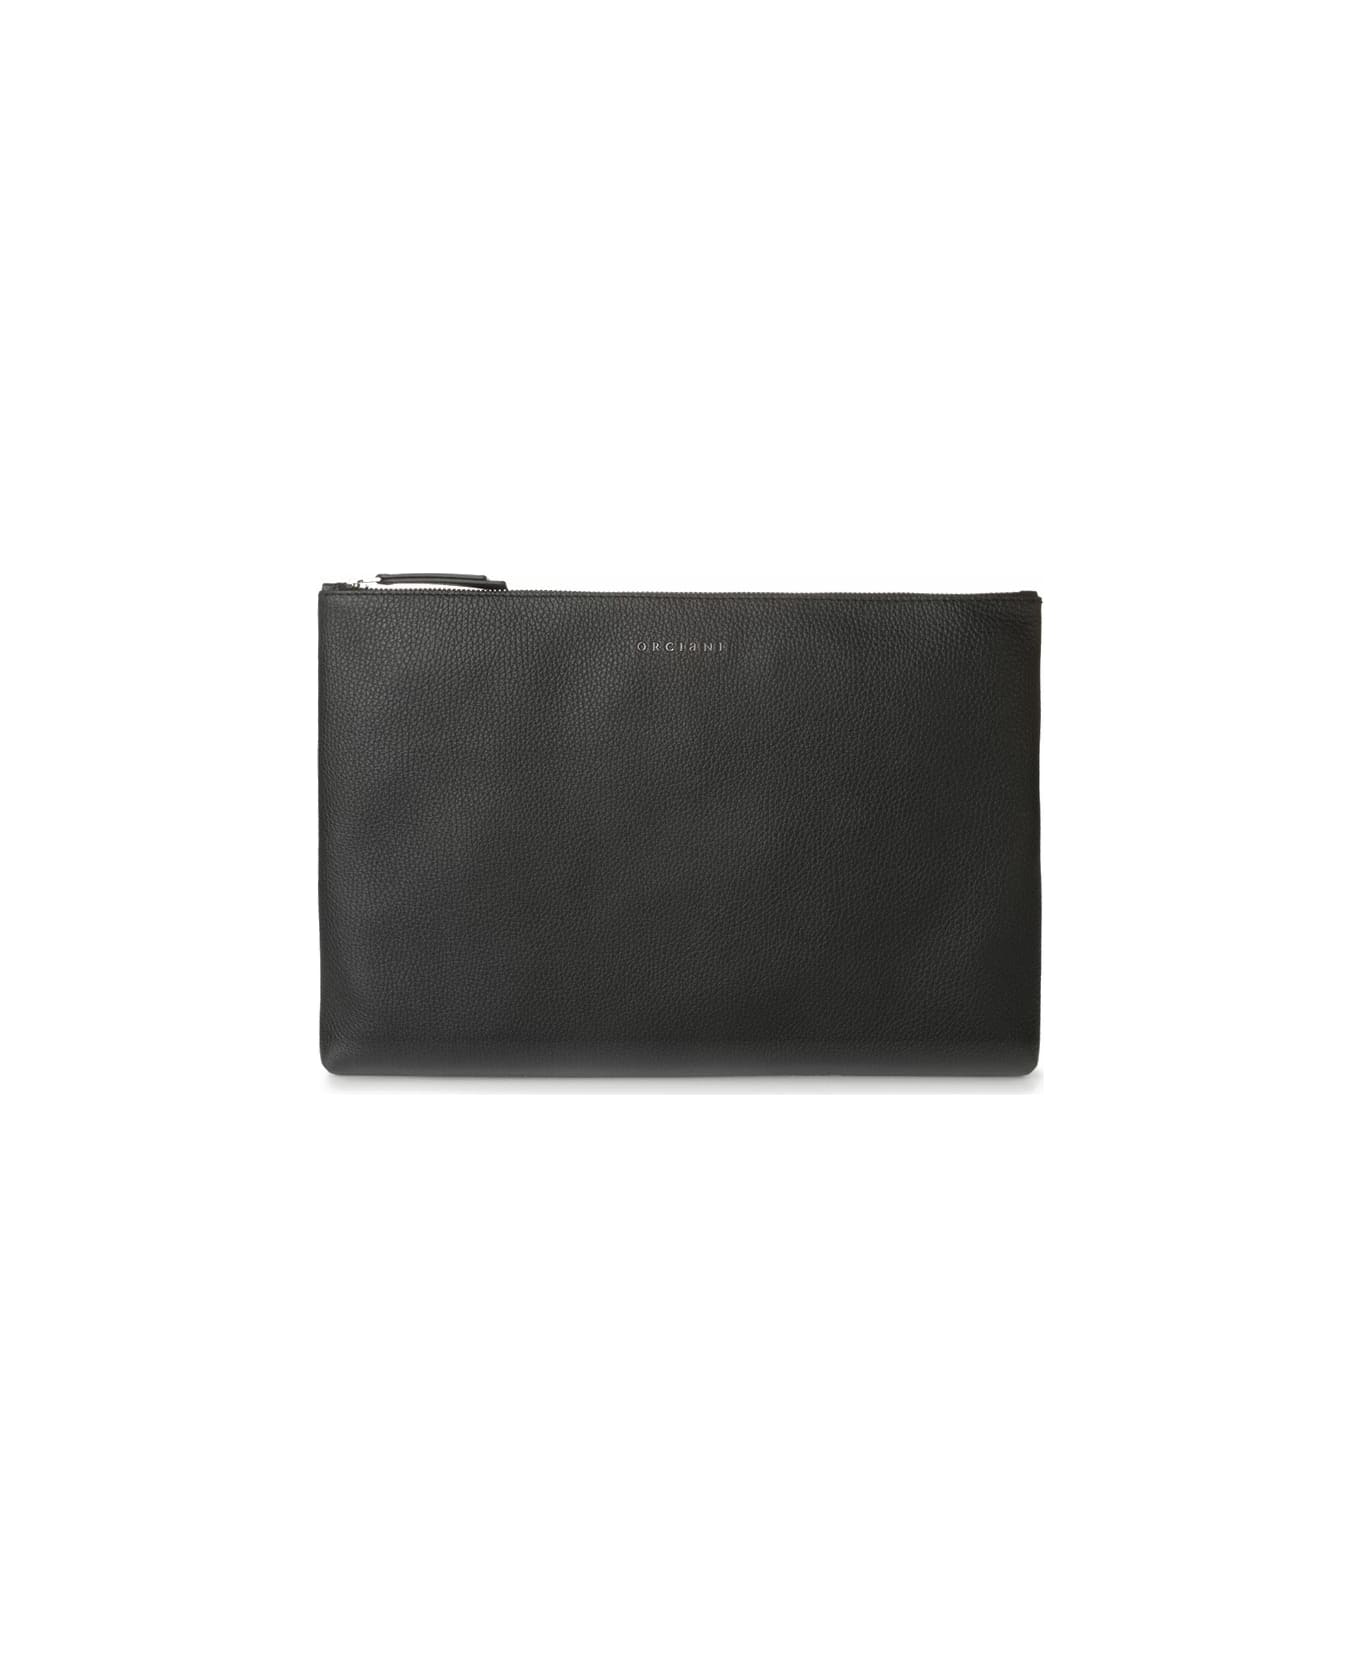 Orciani Leather Clutch Bag - NERO